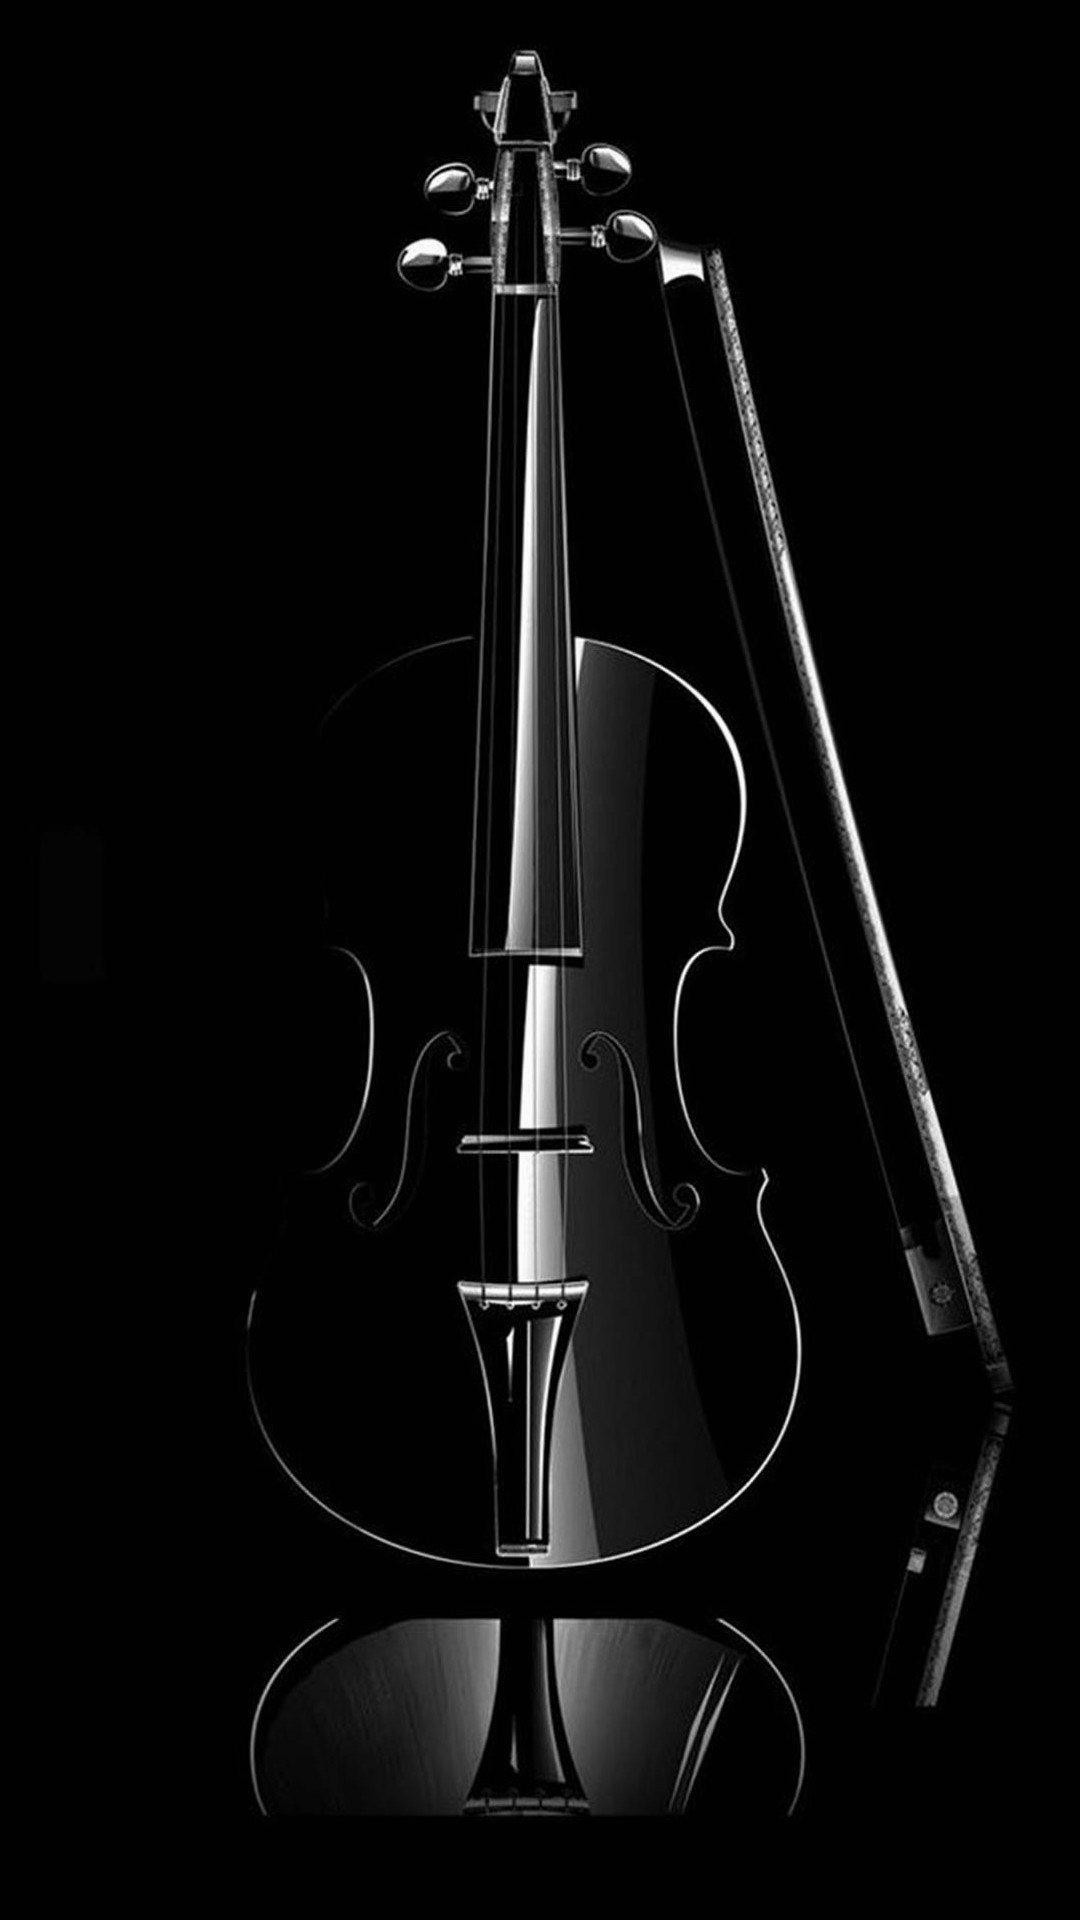 best music wallpapers,bowed string instrument,still life photography,violin,string instrument,cello